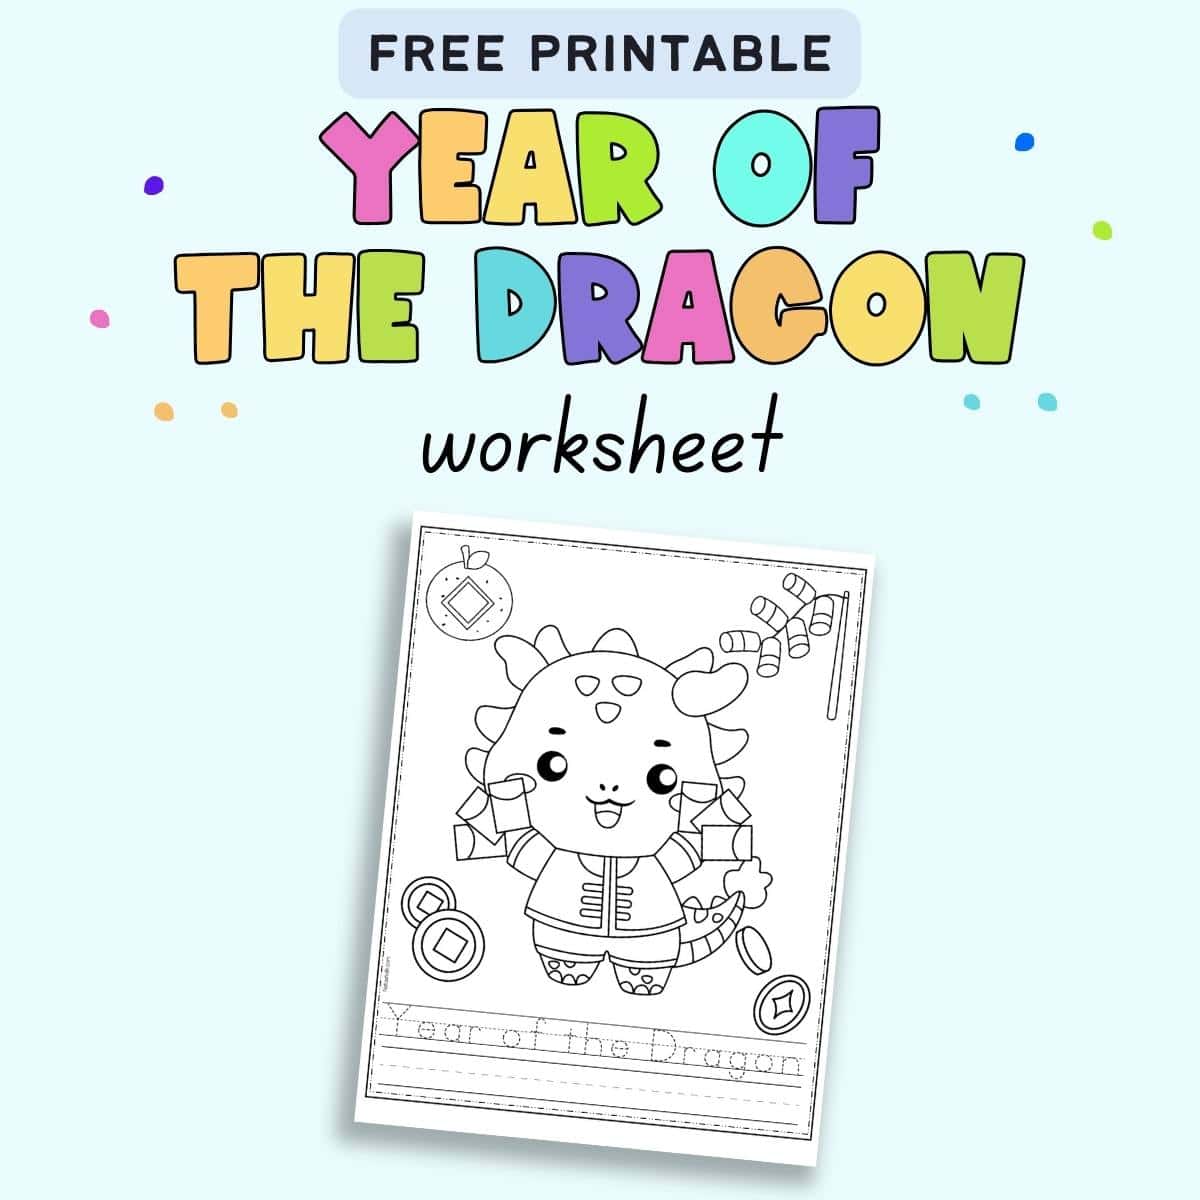 Text "Free printable year of the dragon worksheet" with a preview of a worksheet with an Asian dragon and the text "year of the dragon" in a dotted font to trace